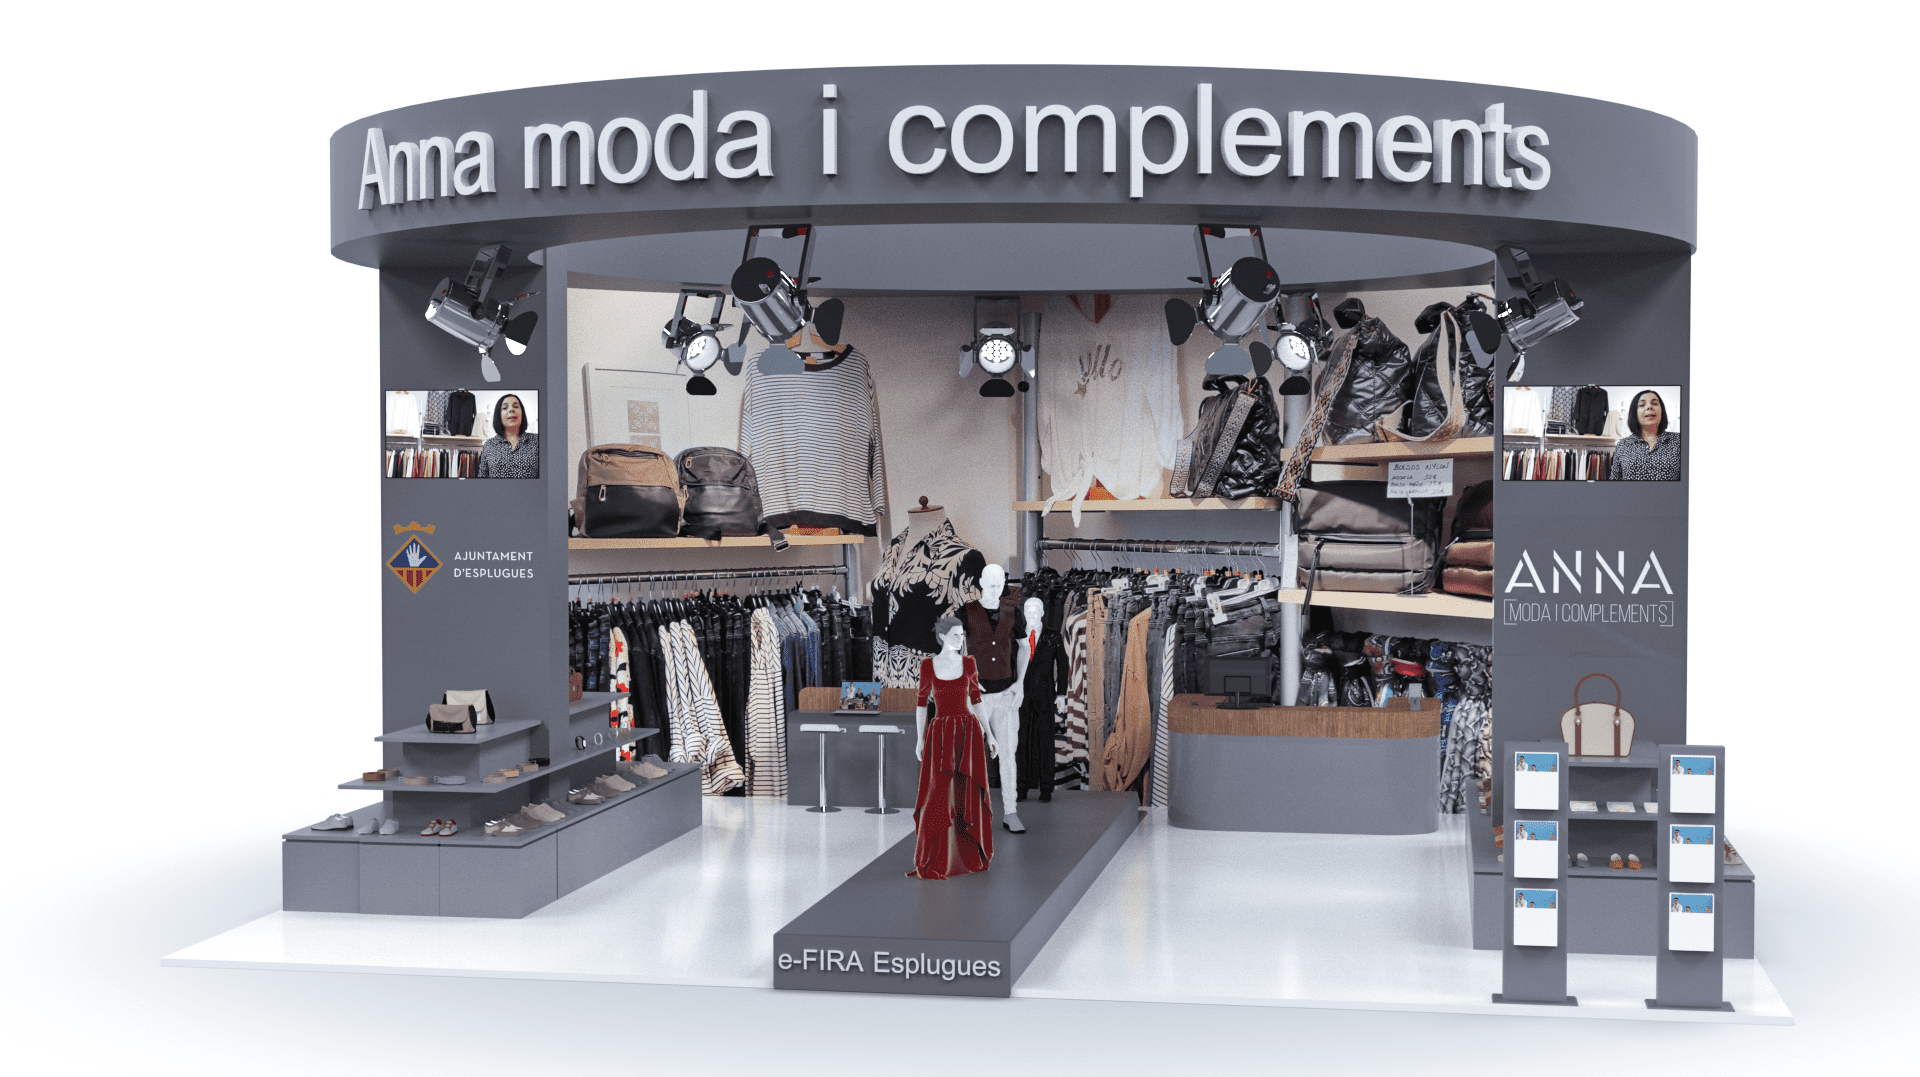 Stand Anna moda i complements